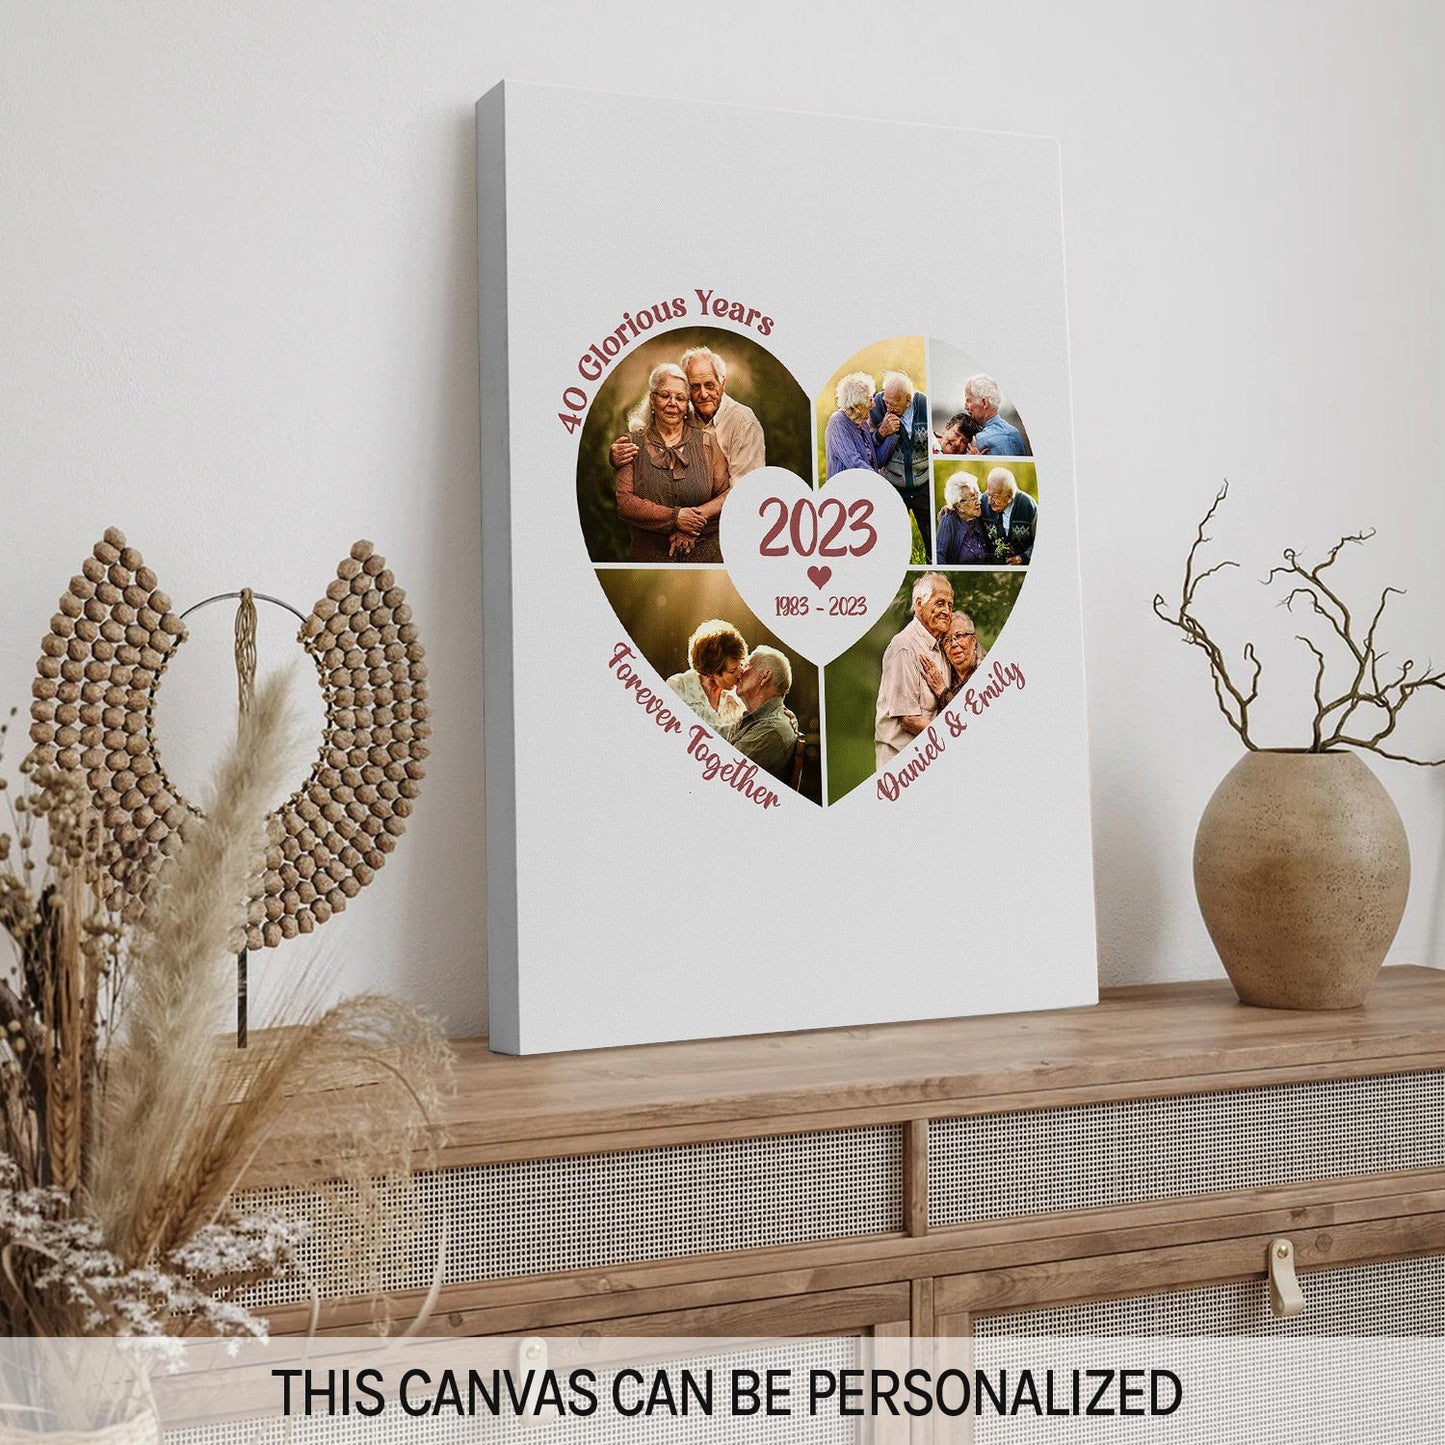 40 Glorious Years Photo Collage - Personalized 40 Year Anniversary gift for him for her - Custom Canvas - MyMindfulGifts